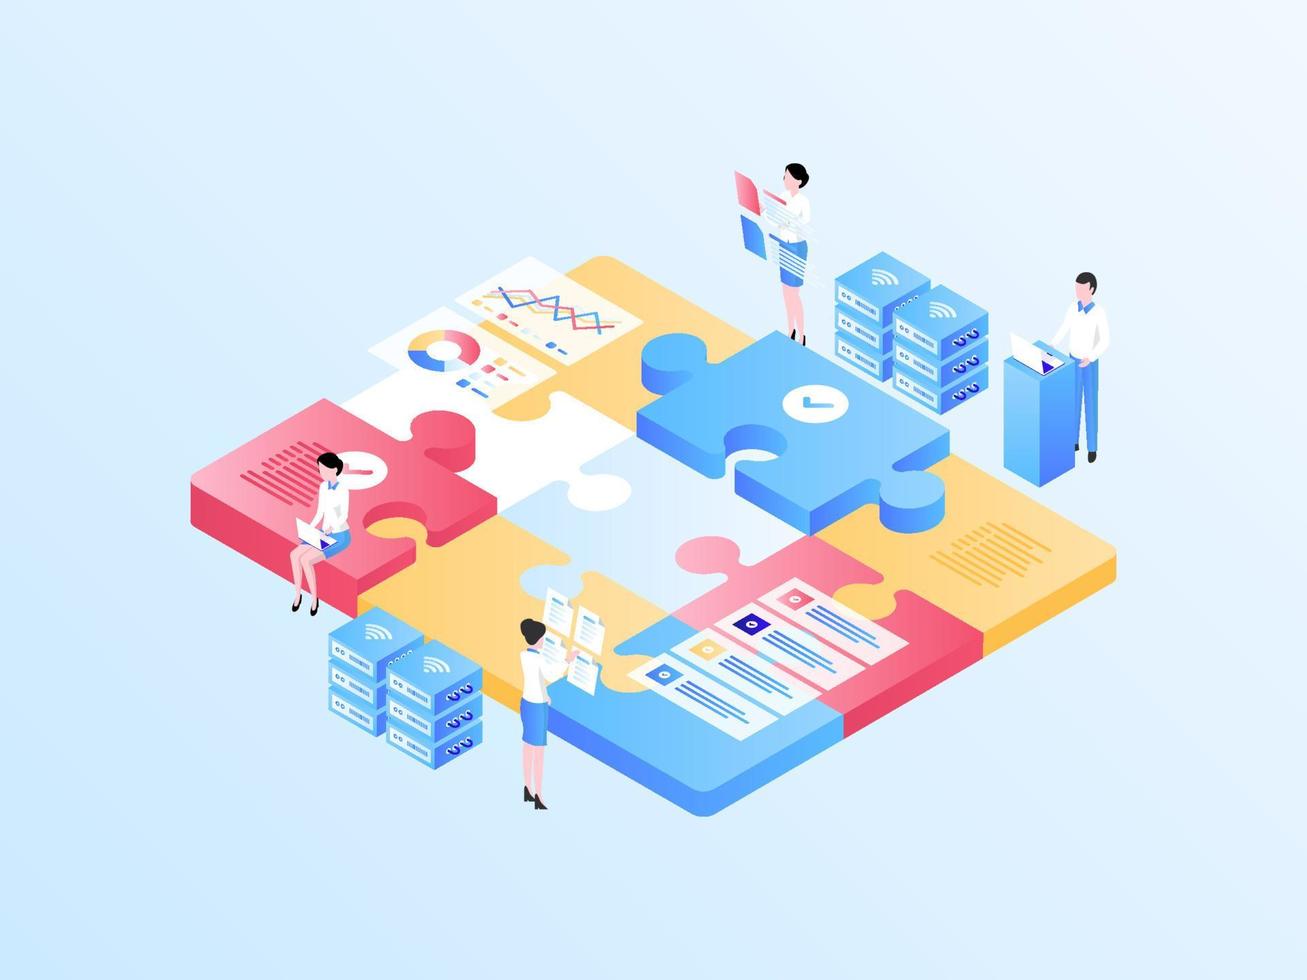 Business Teamwork Isometric Illustration Light Gradient. Suitable for Mobile App, Website, Banner, Diagrams, Infographics, and Other Graphic Assets. vector